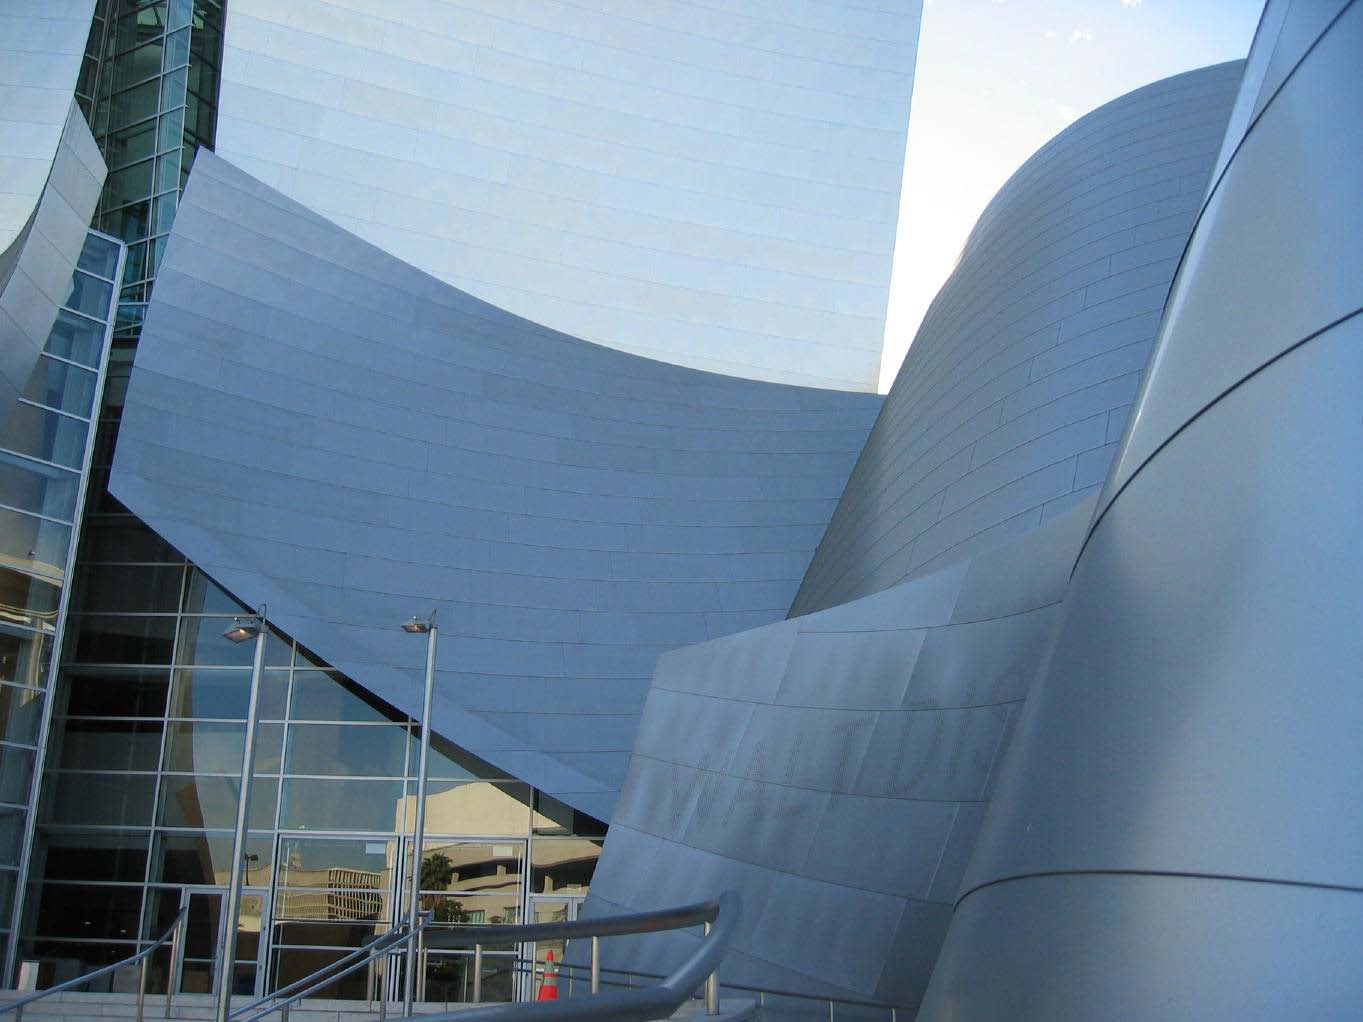 This photo is a close-upview of part of the Walt Disney Concert Hall .